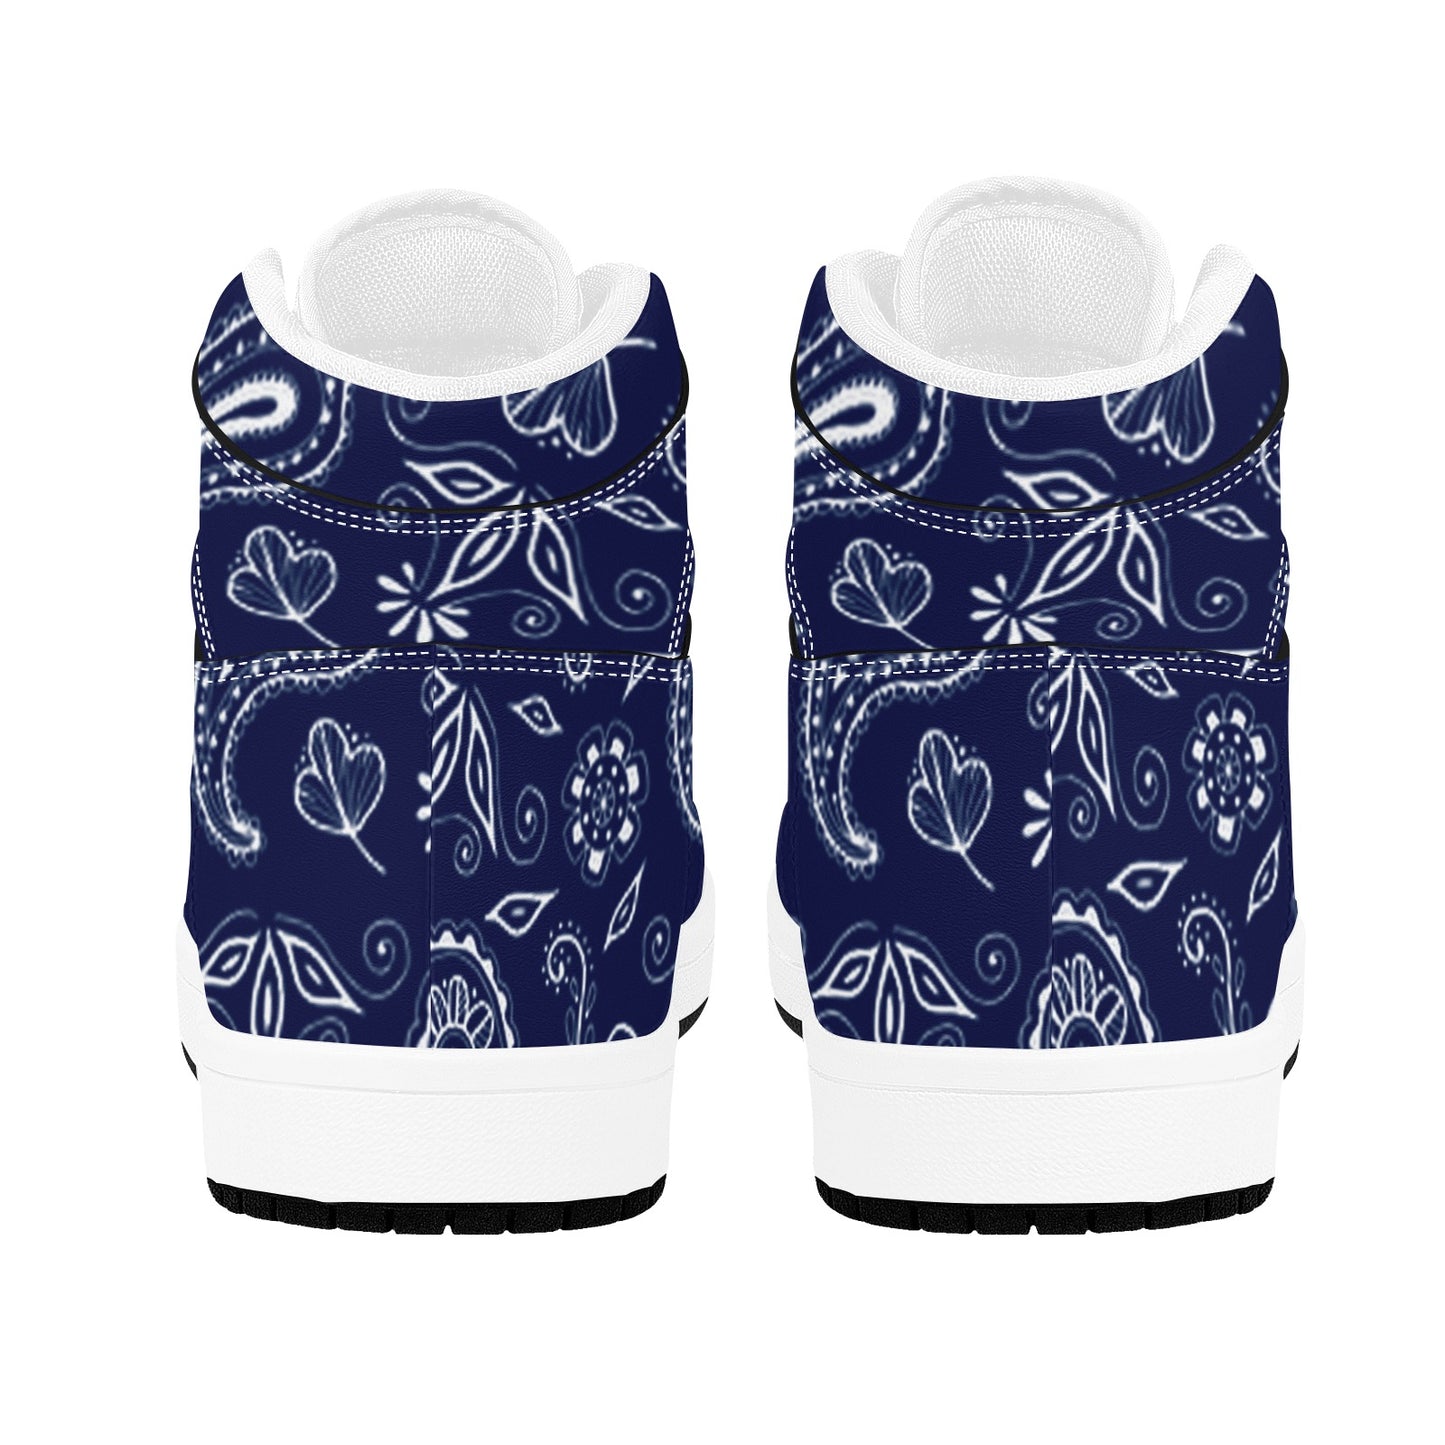 Blue High Top Sneakers Blue Paisley Design High Top Sneakers Men's High Top Sneakers